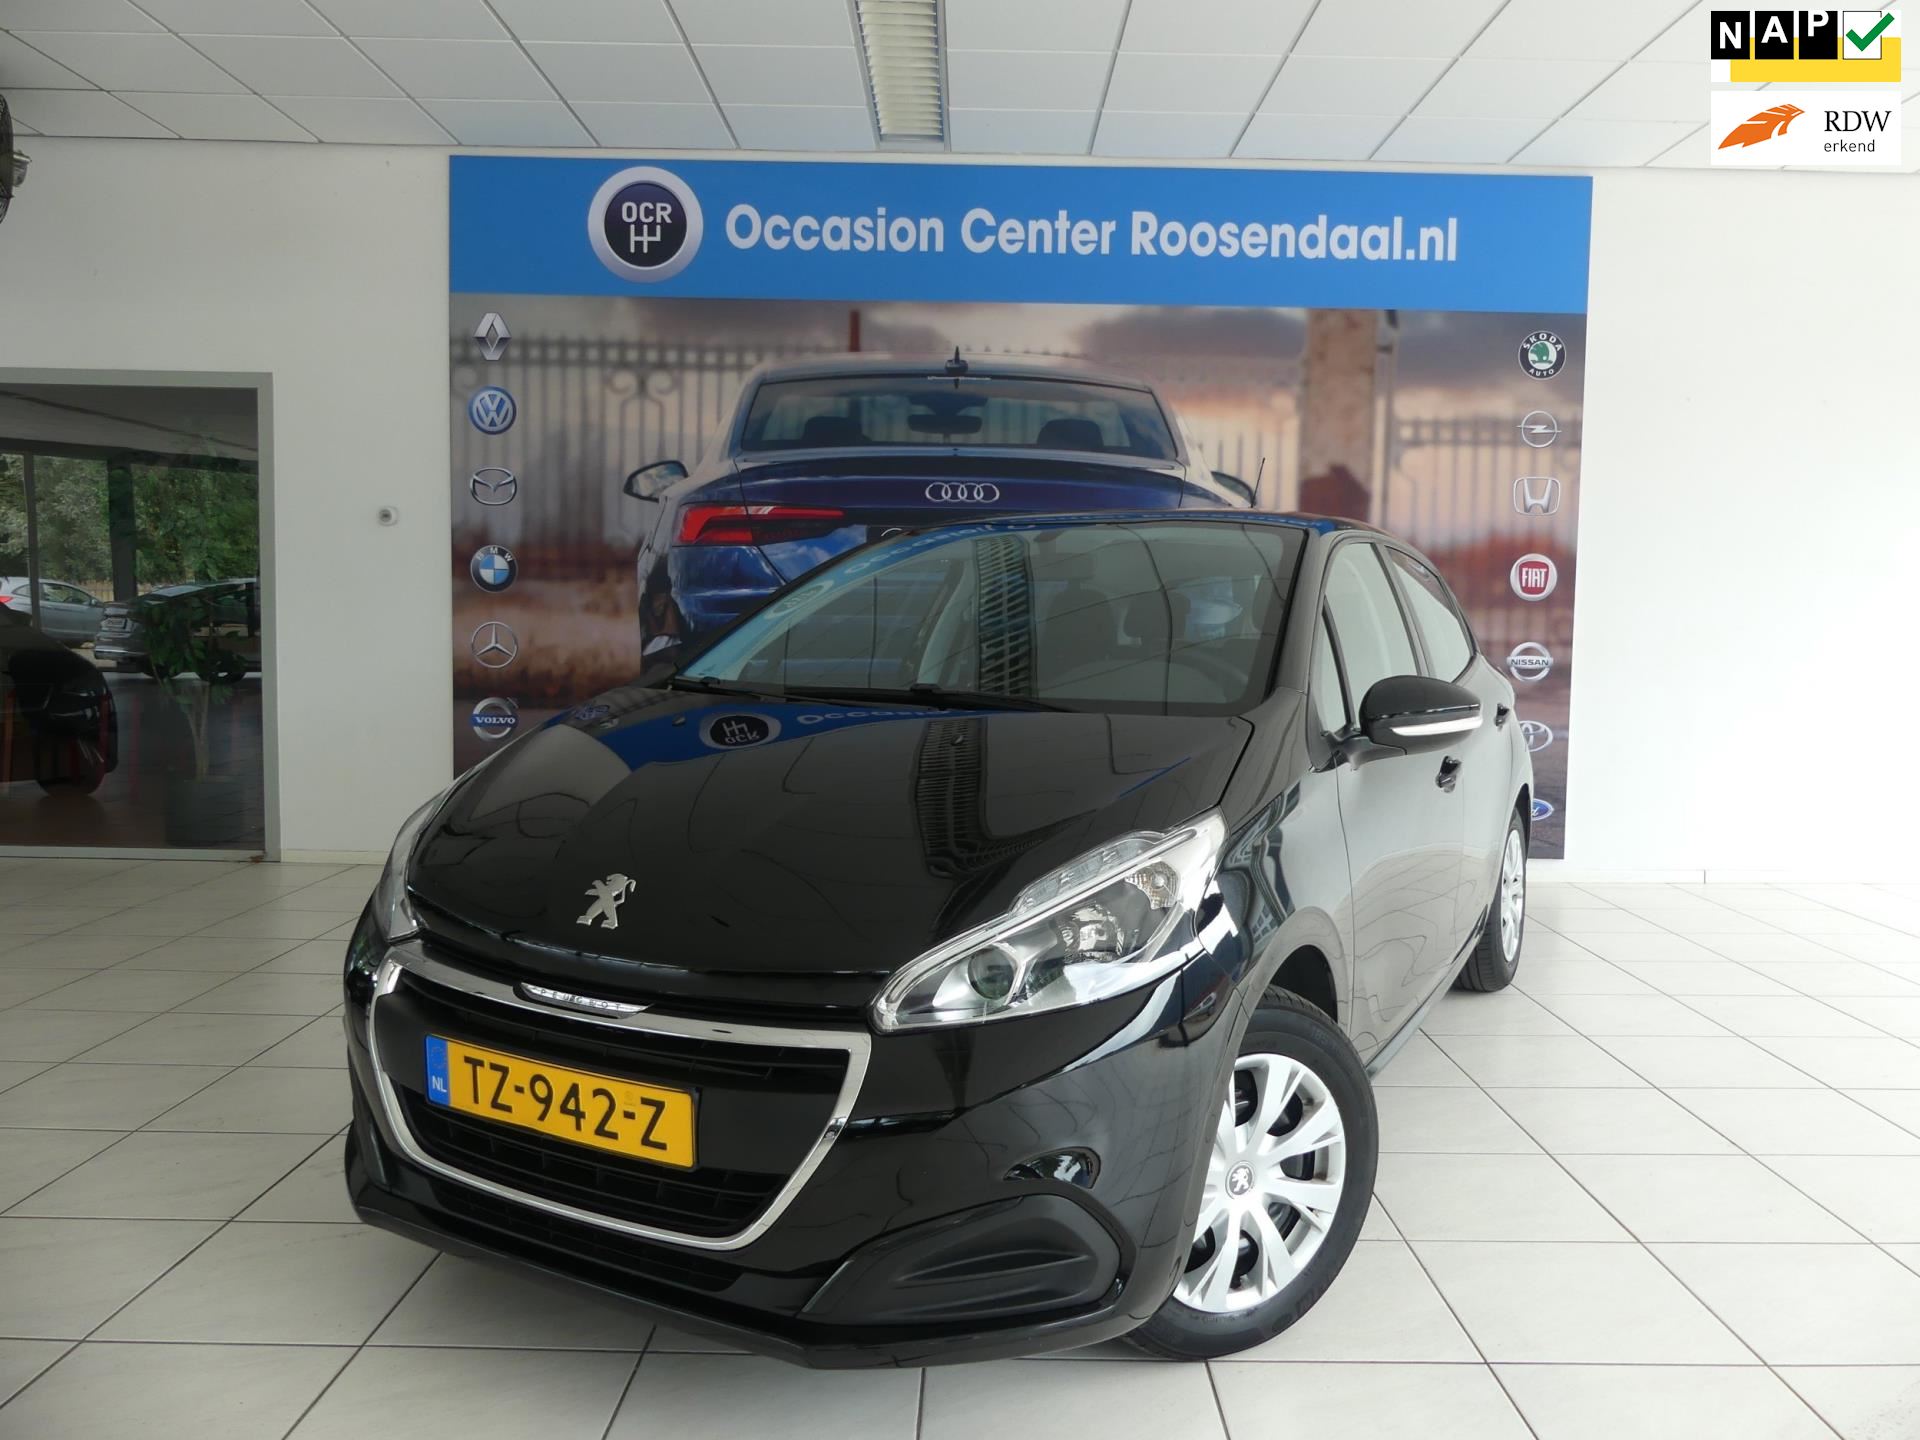 Peugeot 208 occasion - Occasion Center Roosendaal